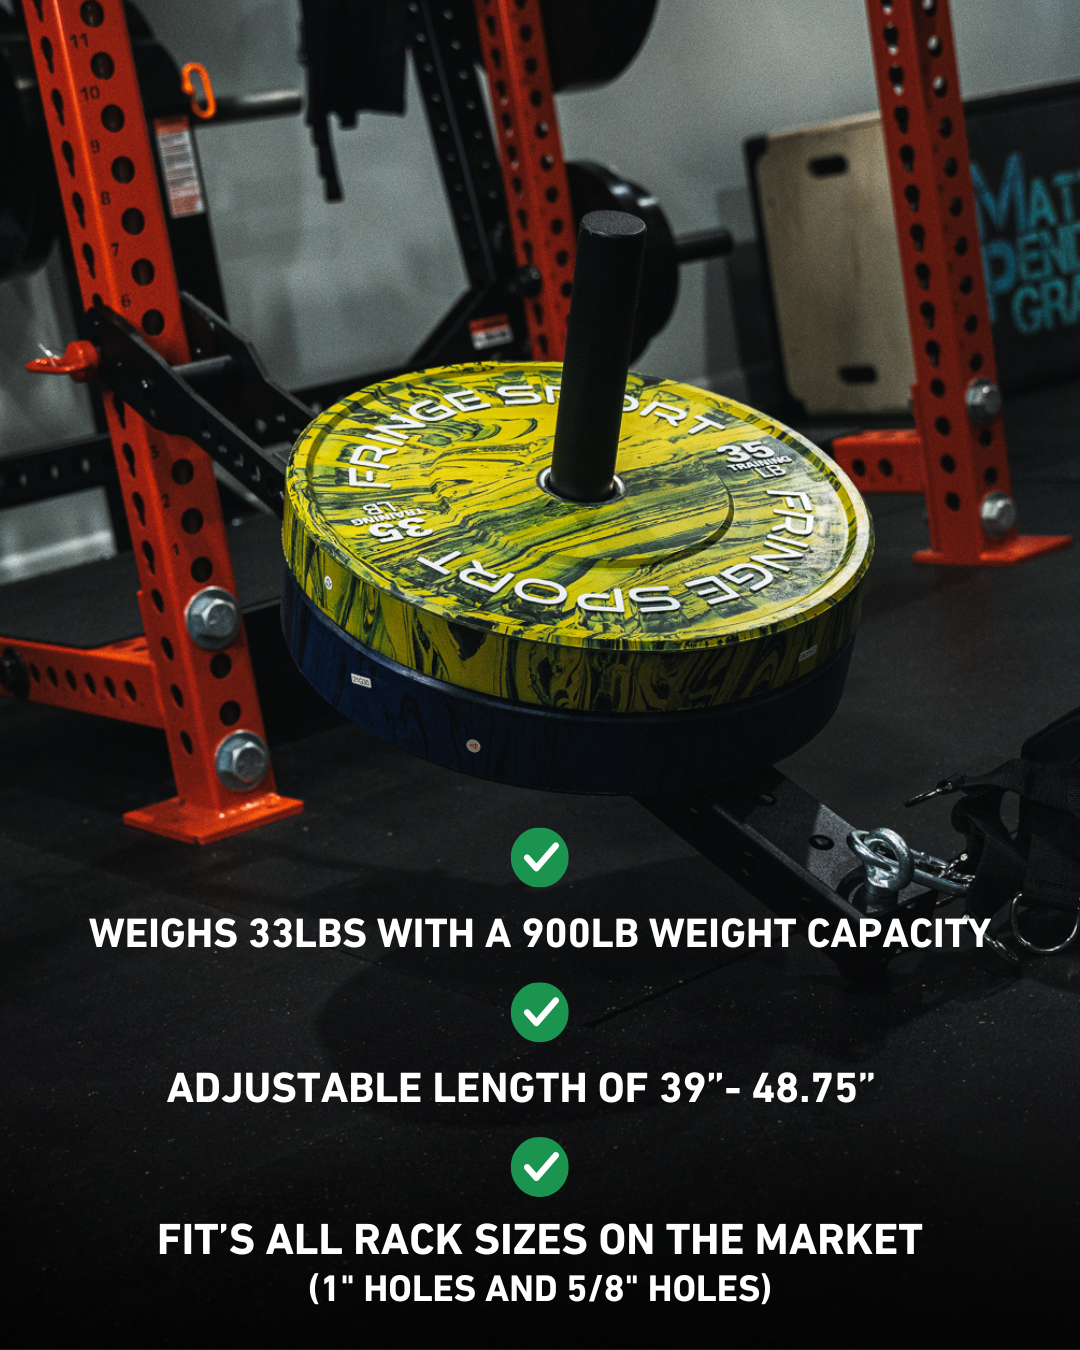 The Mammoth belt squat weighs 33lbs with a 900lb weight capacity, has an adjustable length ranging from 39 inches to 48.75 inches, and fits all rack sizes on the market which include 1 inch holes and 5/8 inch holes.